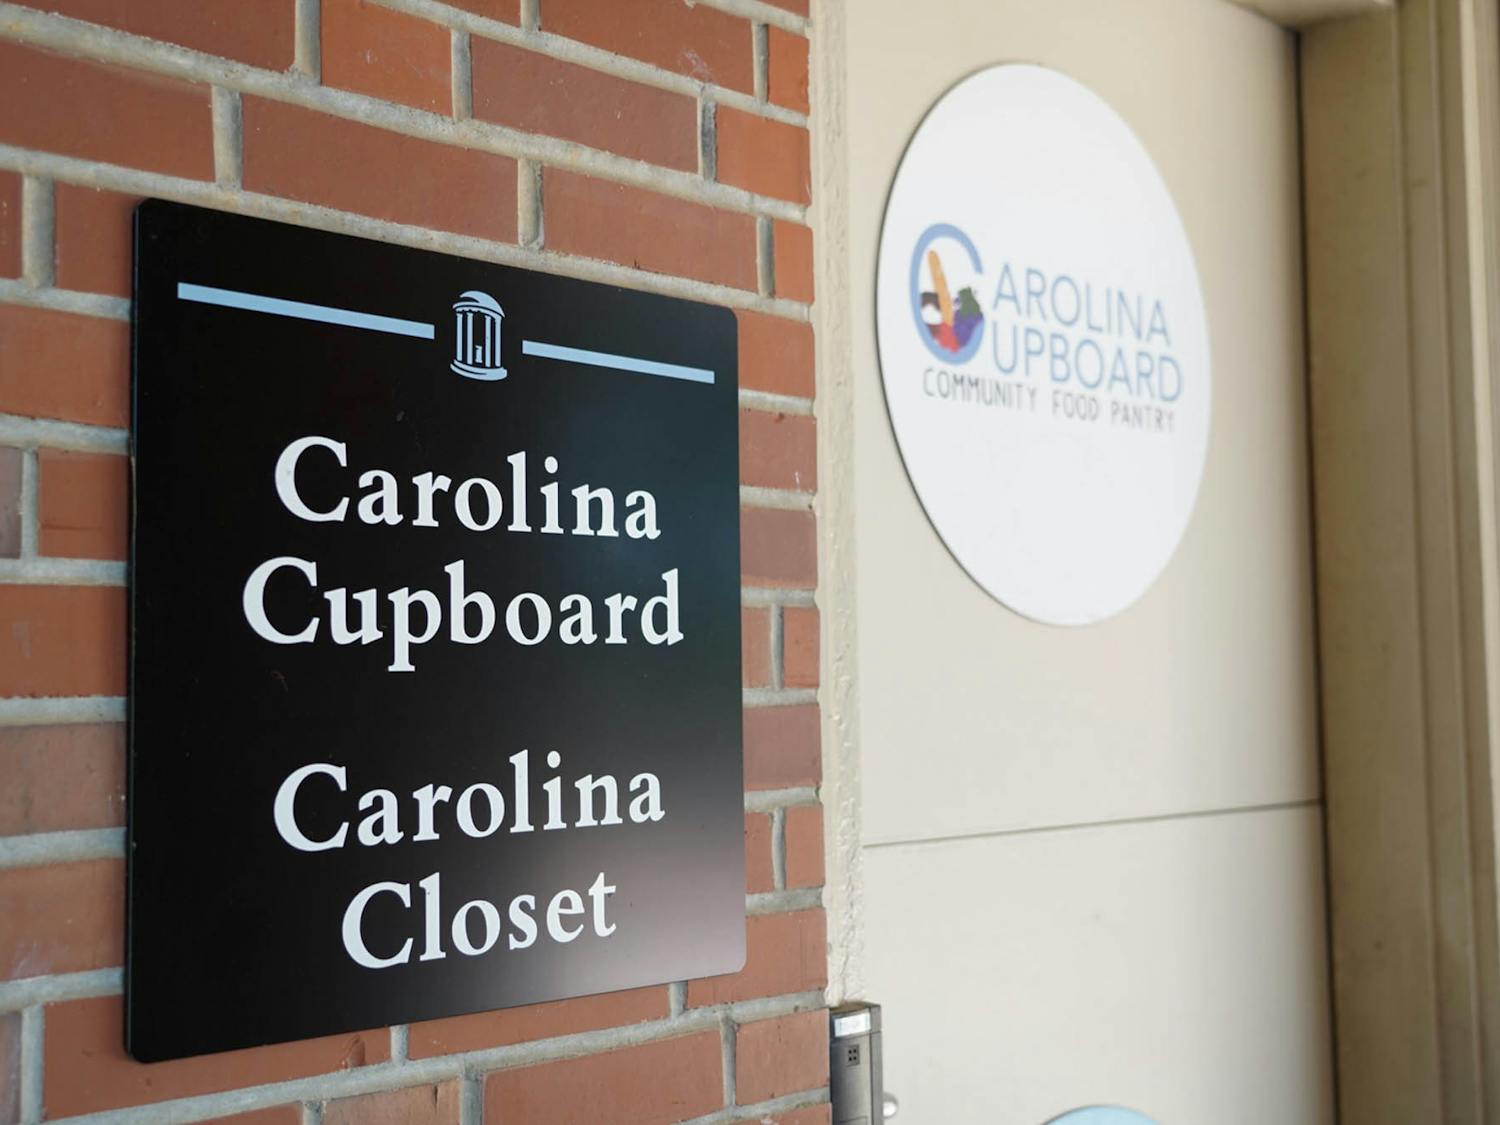 Located in the basement of Avery Residence Hall, Carolina Cupboard is an on-campus organization which provides food for students experiencing food insecurity.